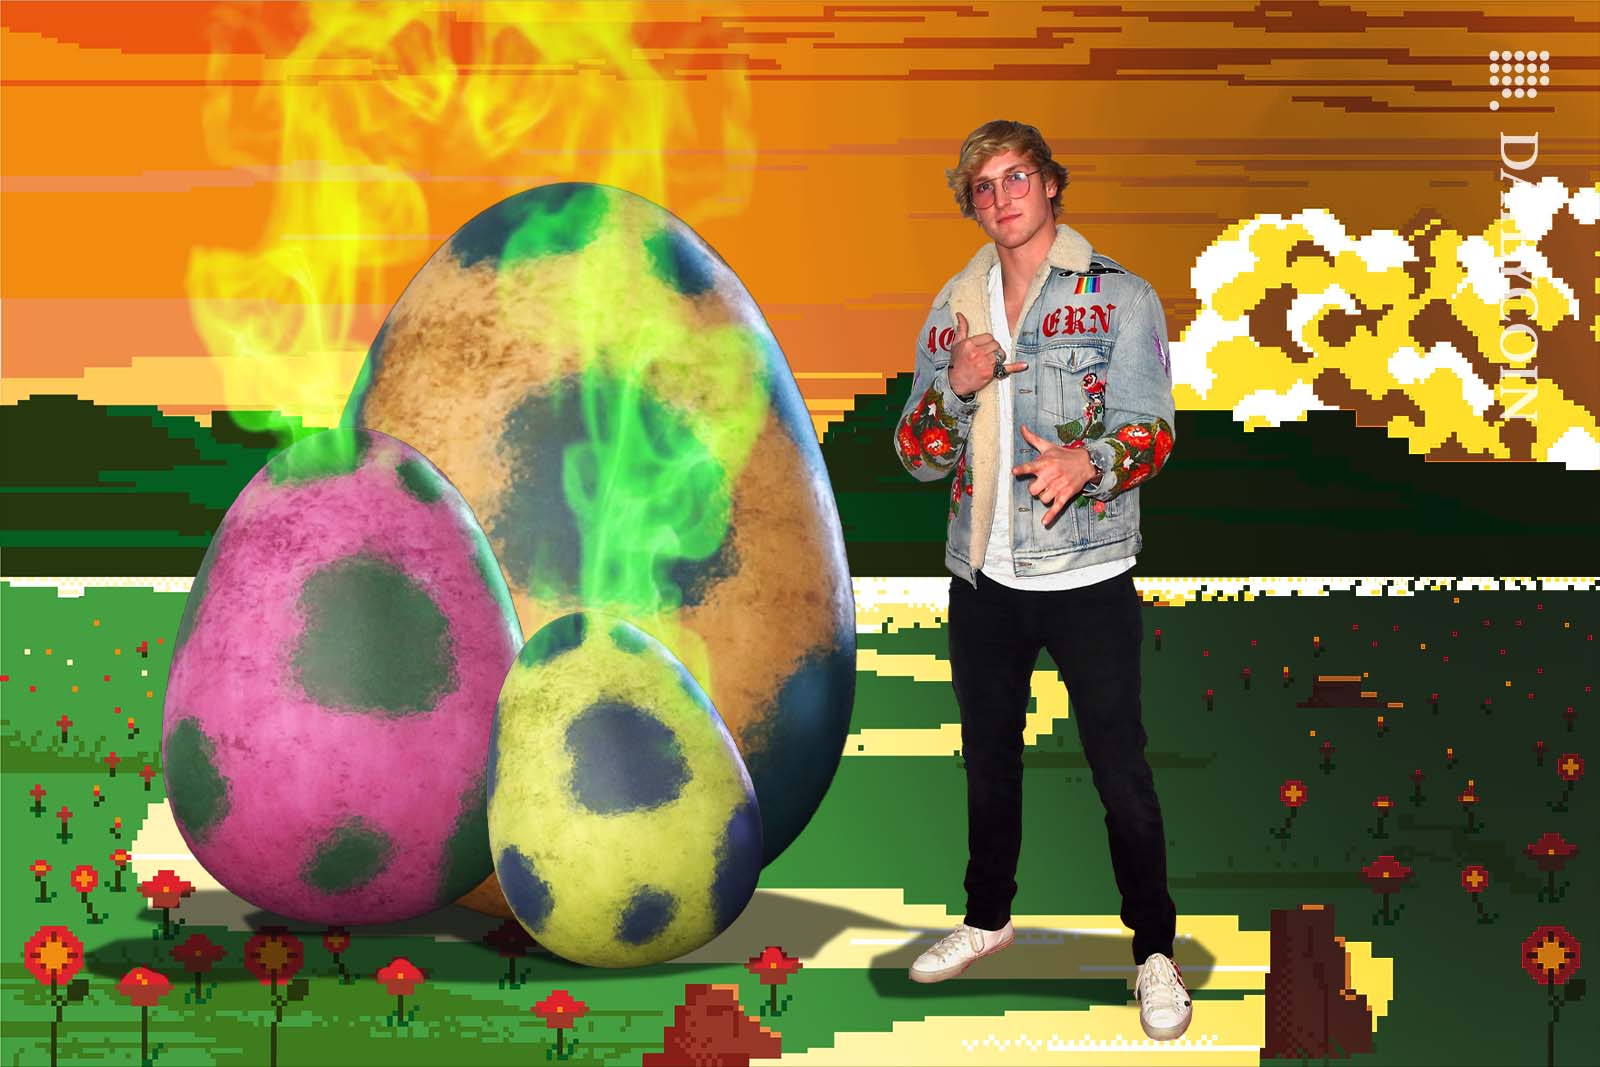 Logan Paul posing next to some smelly CryptoZoo eggs in a pixelated environment.